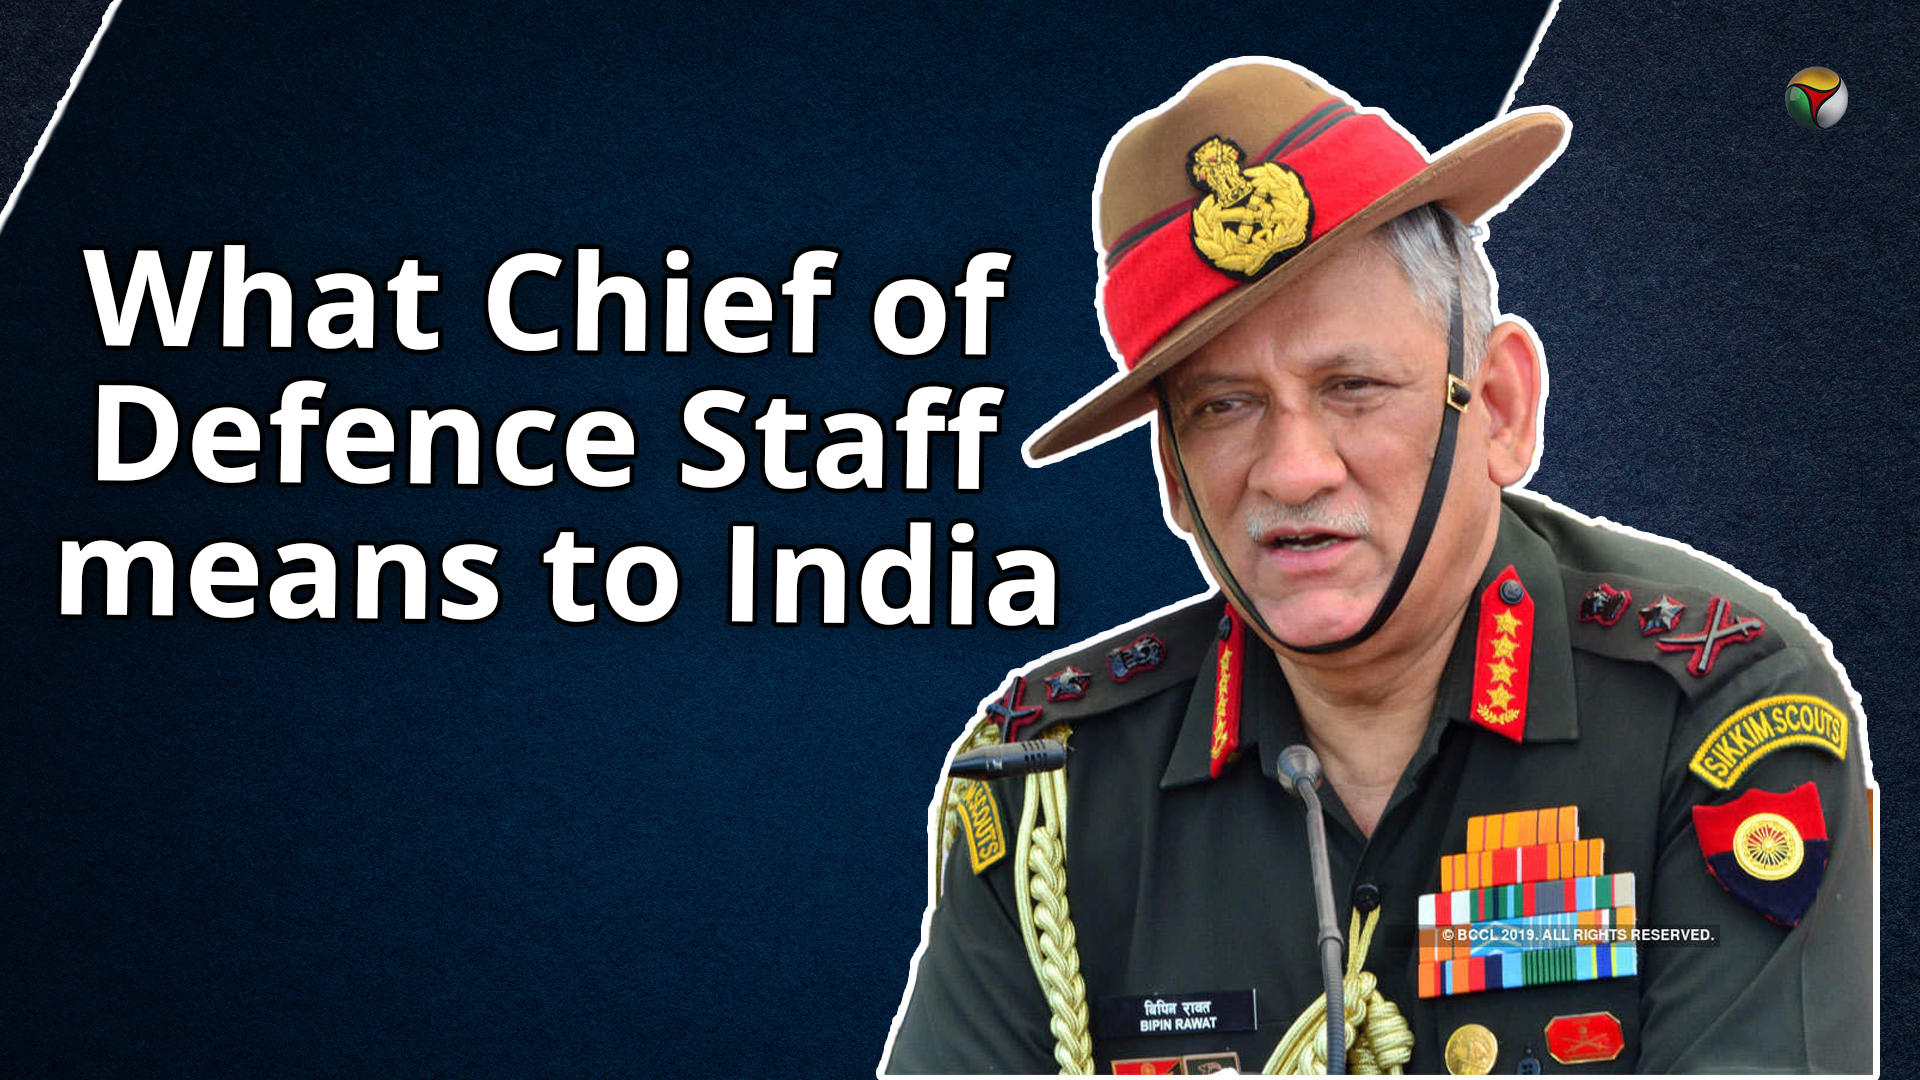 What Chief of Defence Staff means to India